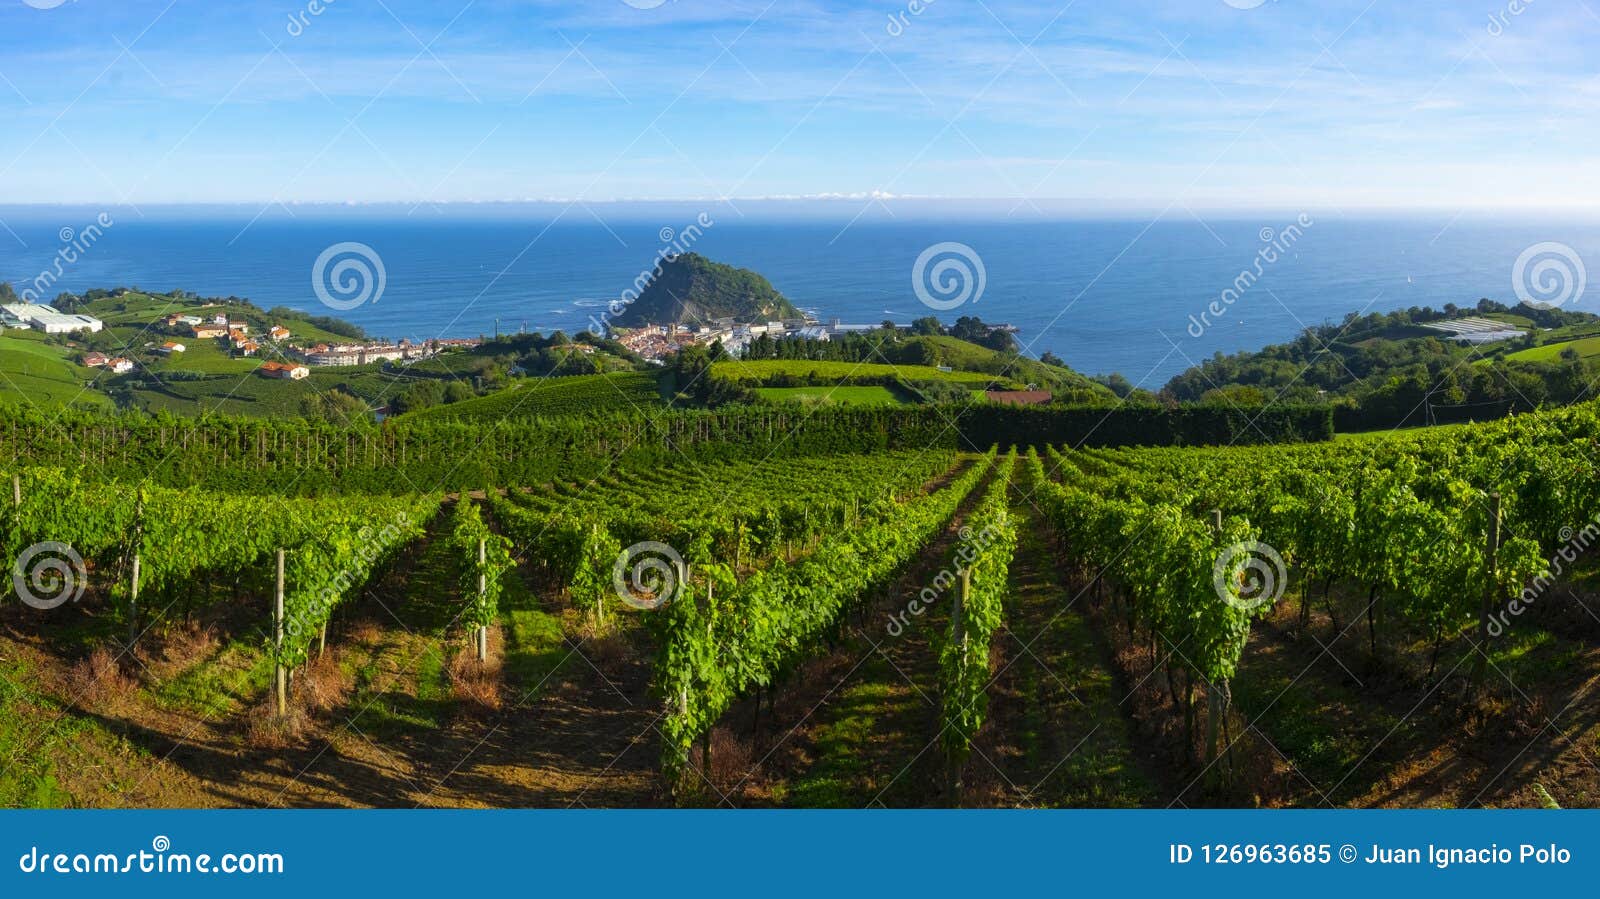 vineyards and wine production with the cantabrian sea in the background